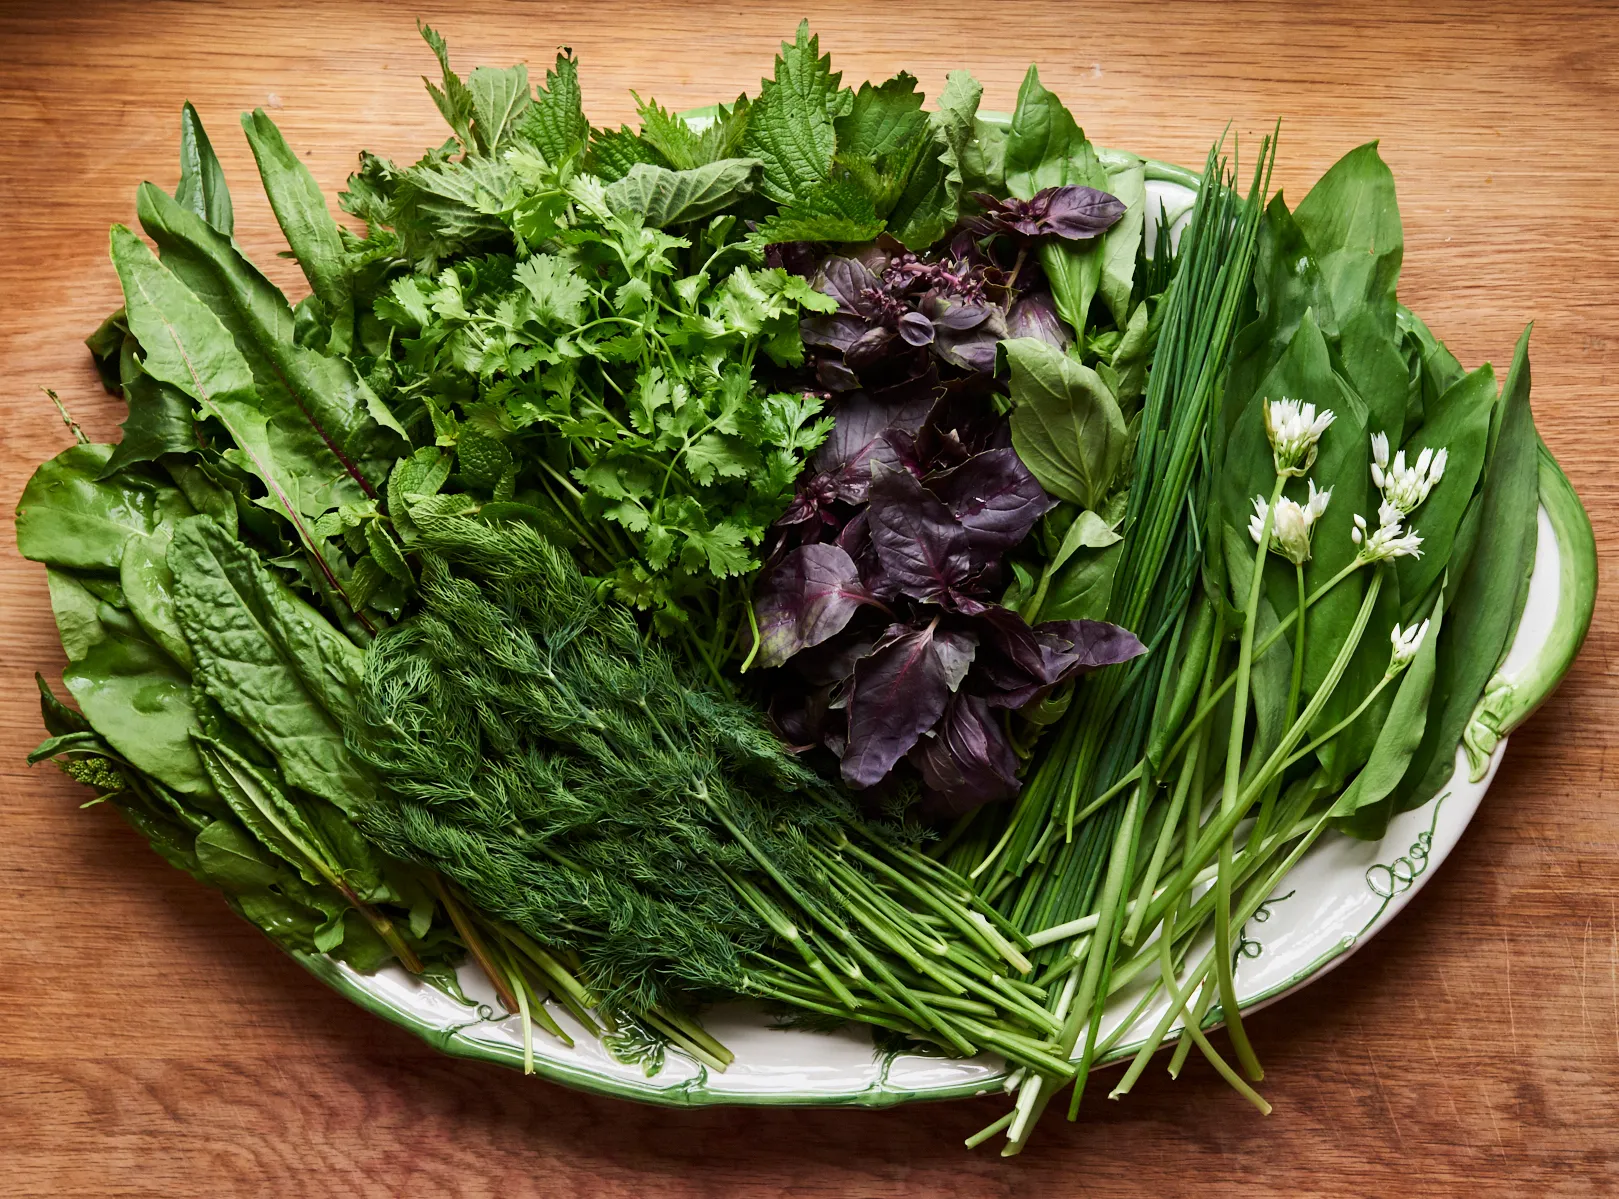 Delicious Herbs that Have Powerful Health Benefits